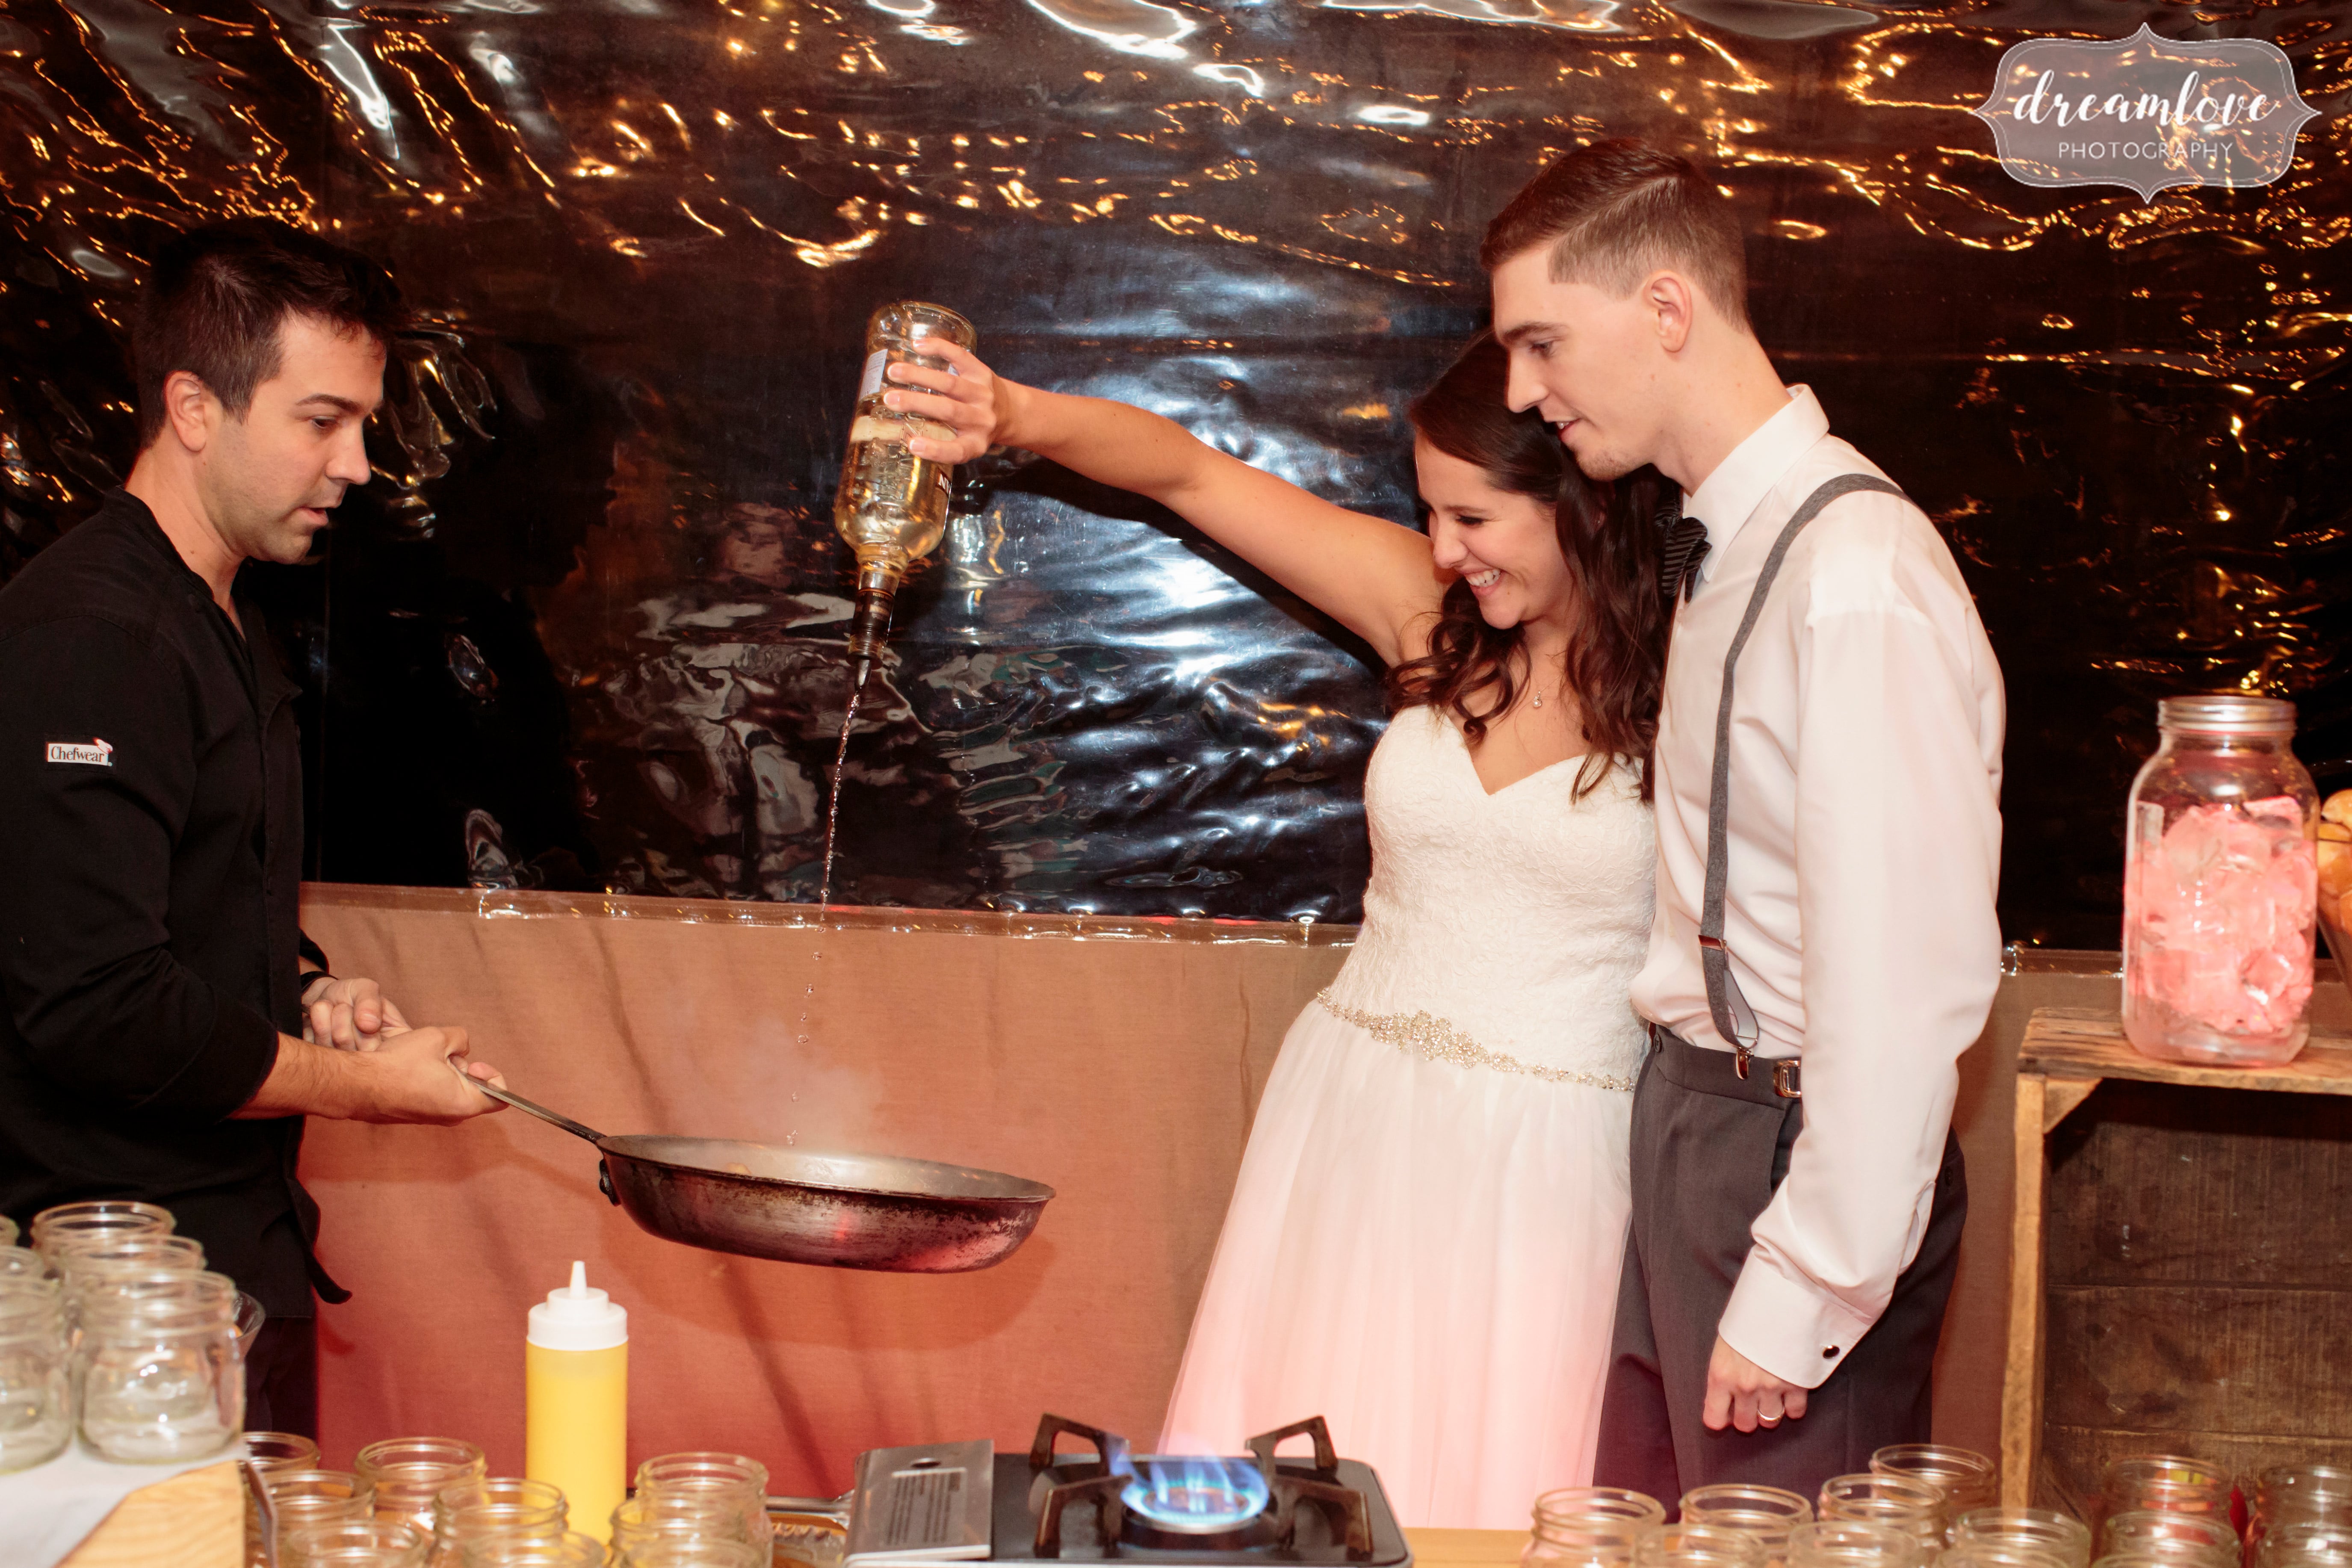 The bride pours oil on a hot pain to fry doughnuts at this rustic wedding reception in November in CT.